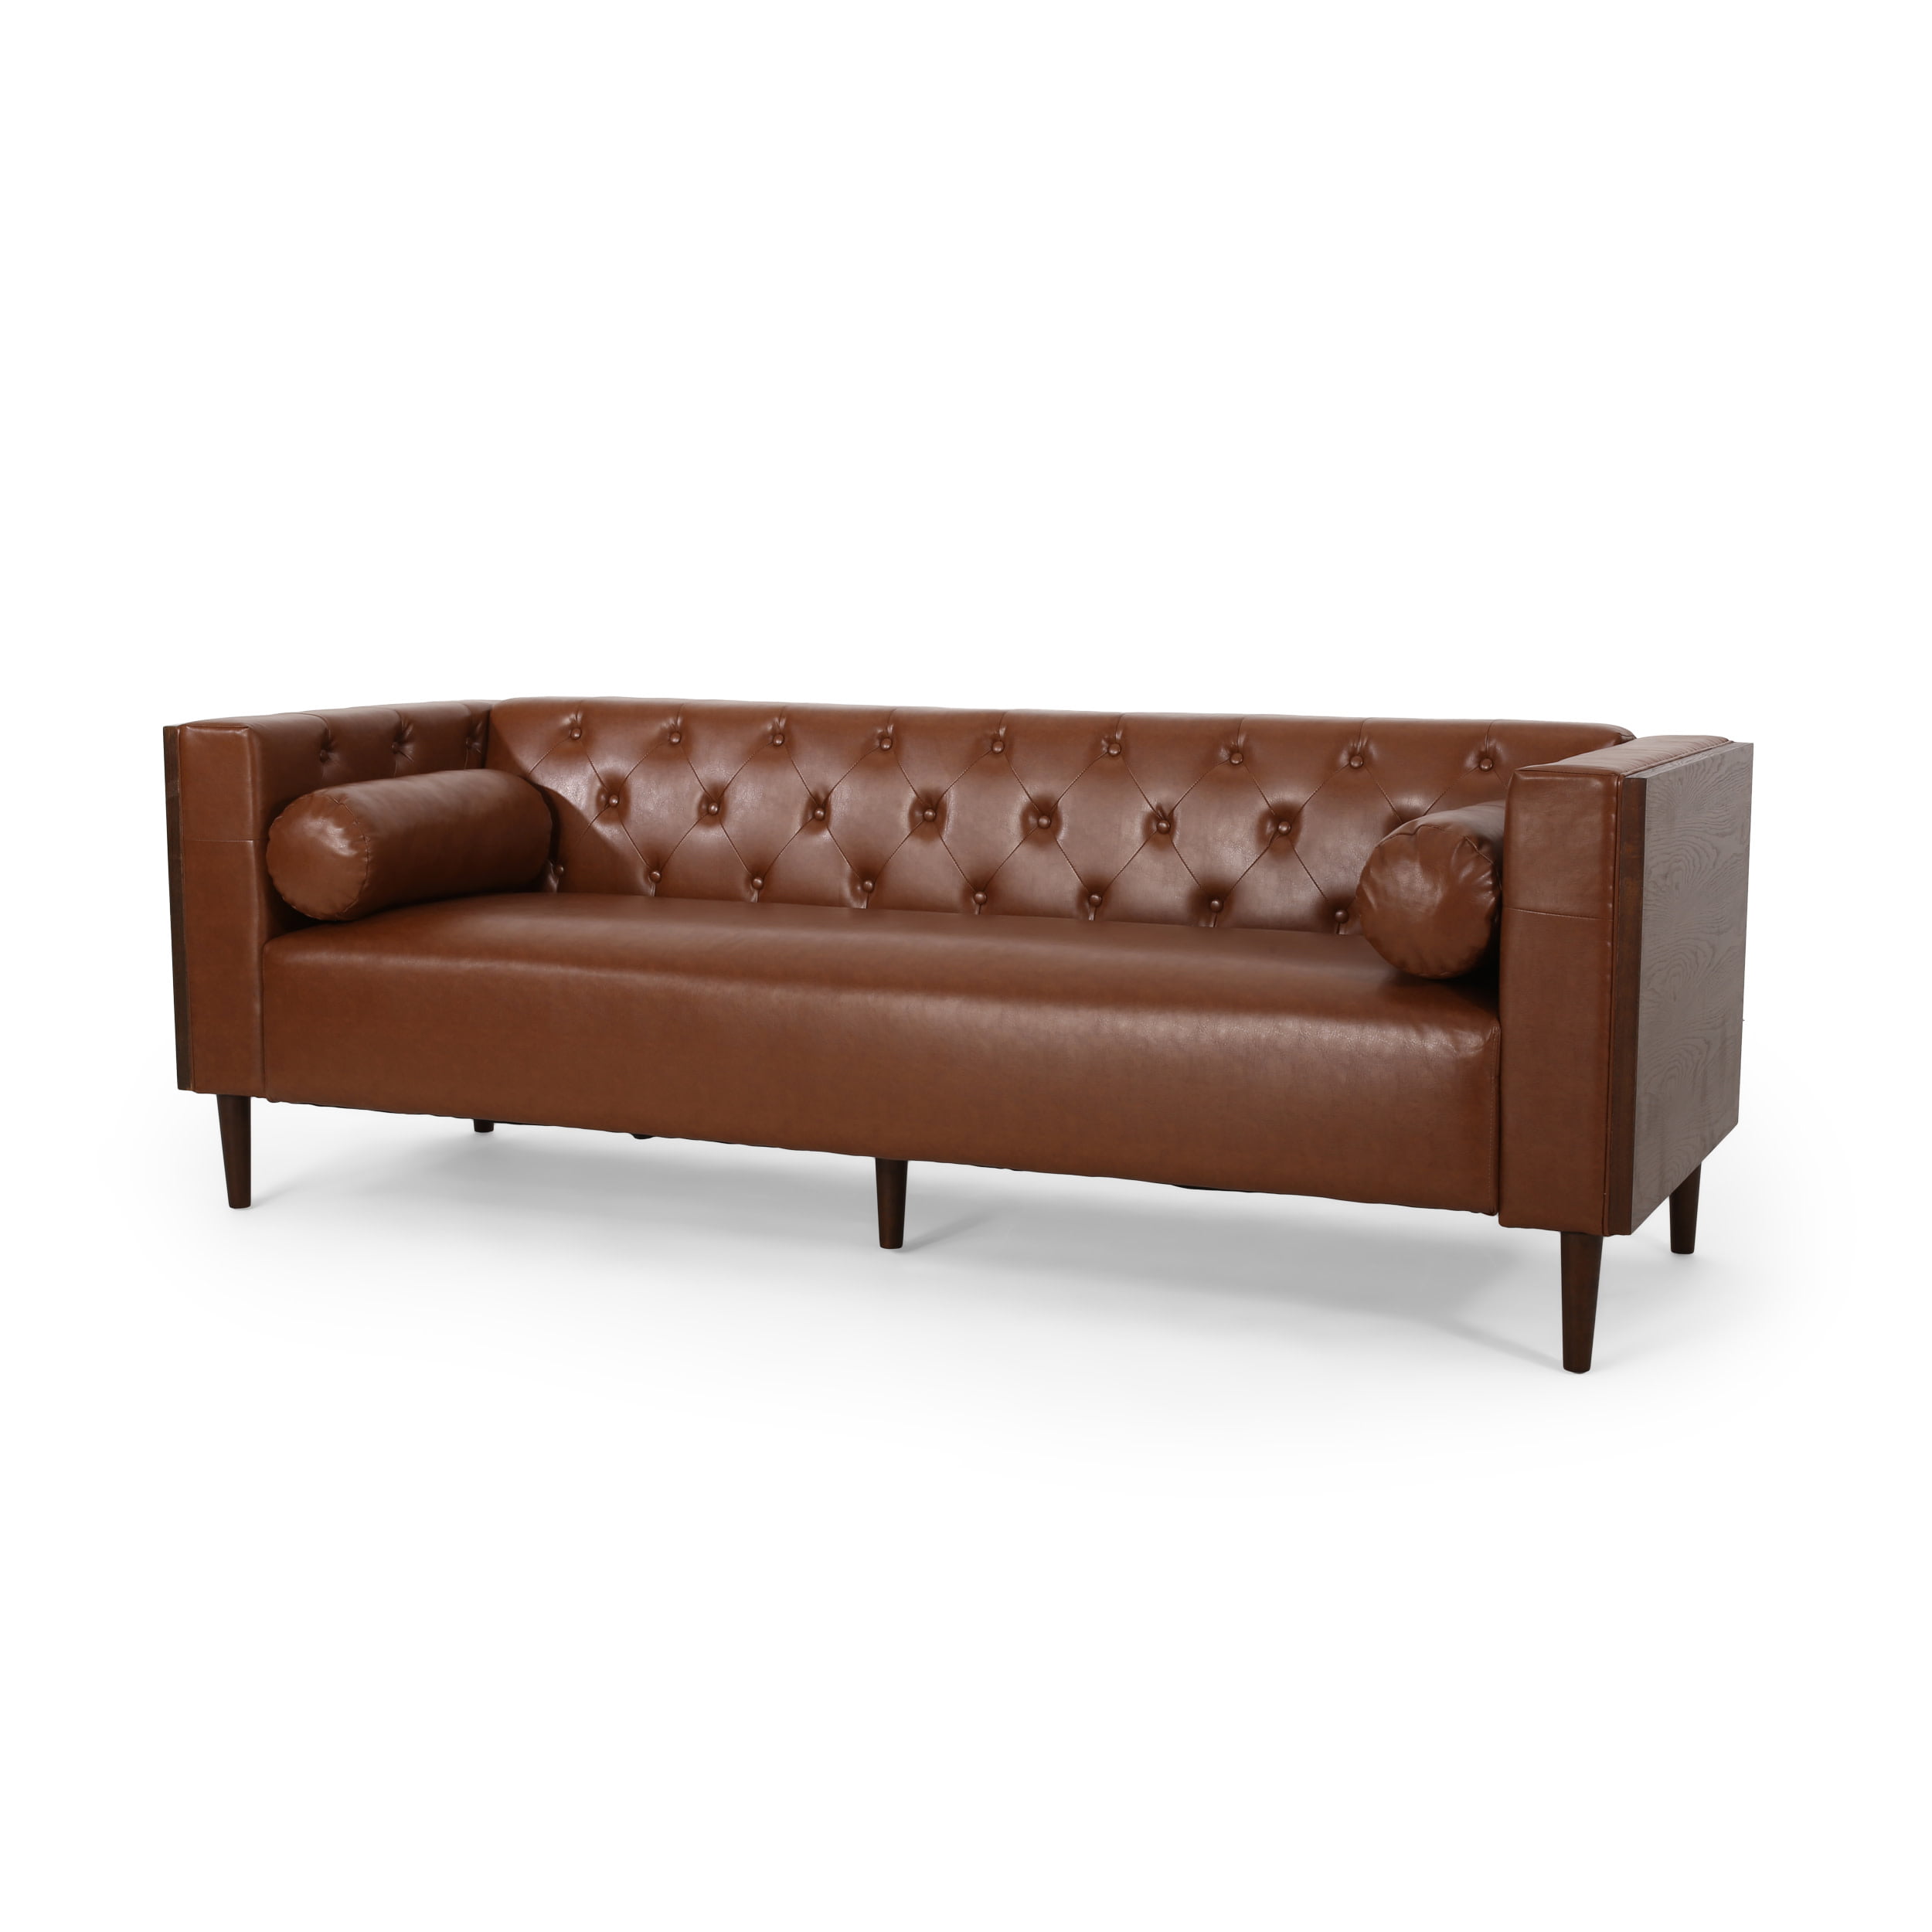 GDF Studio Neilan Contemporary Faux Leather Tufted 3 Seater Sofa with ...